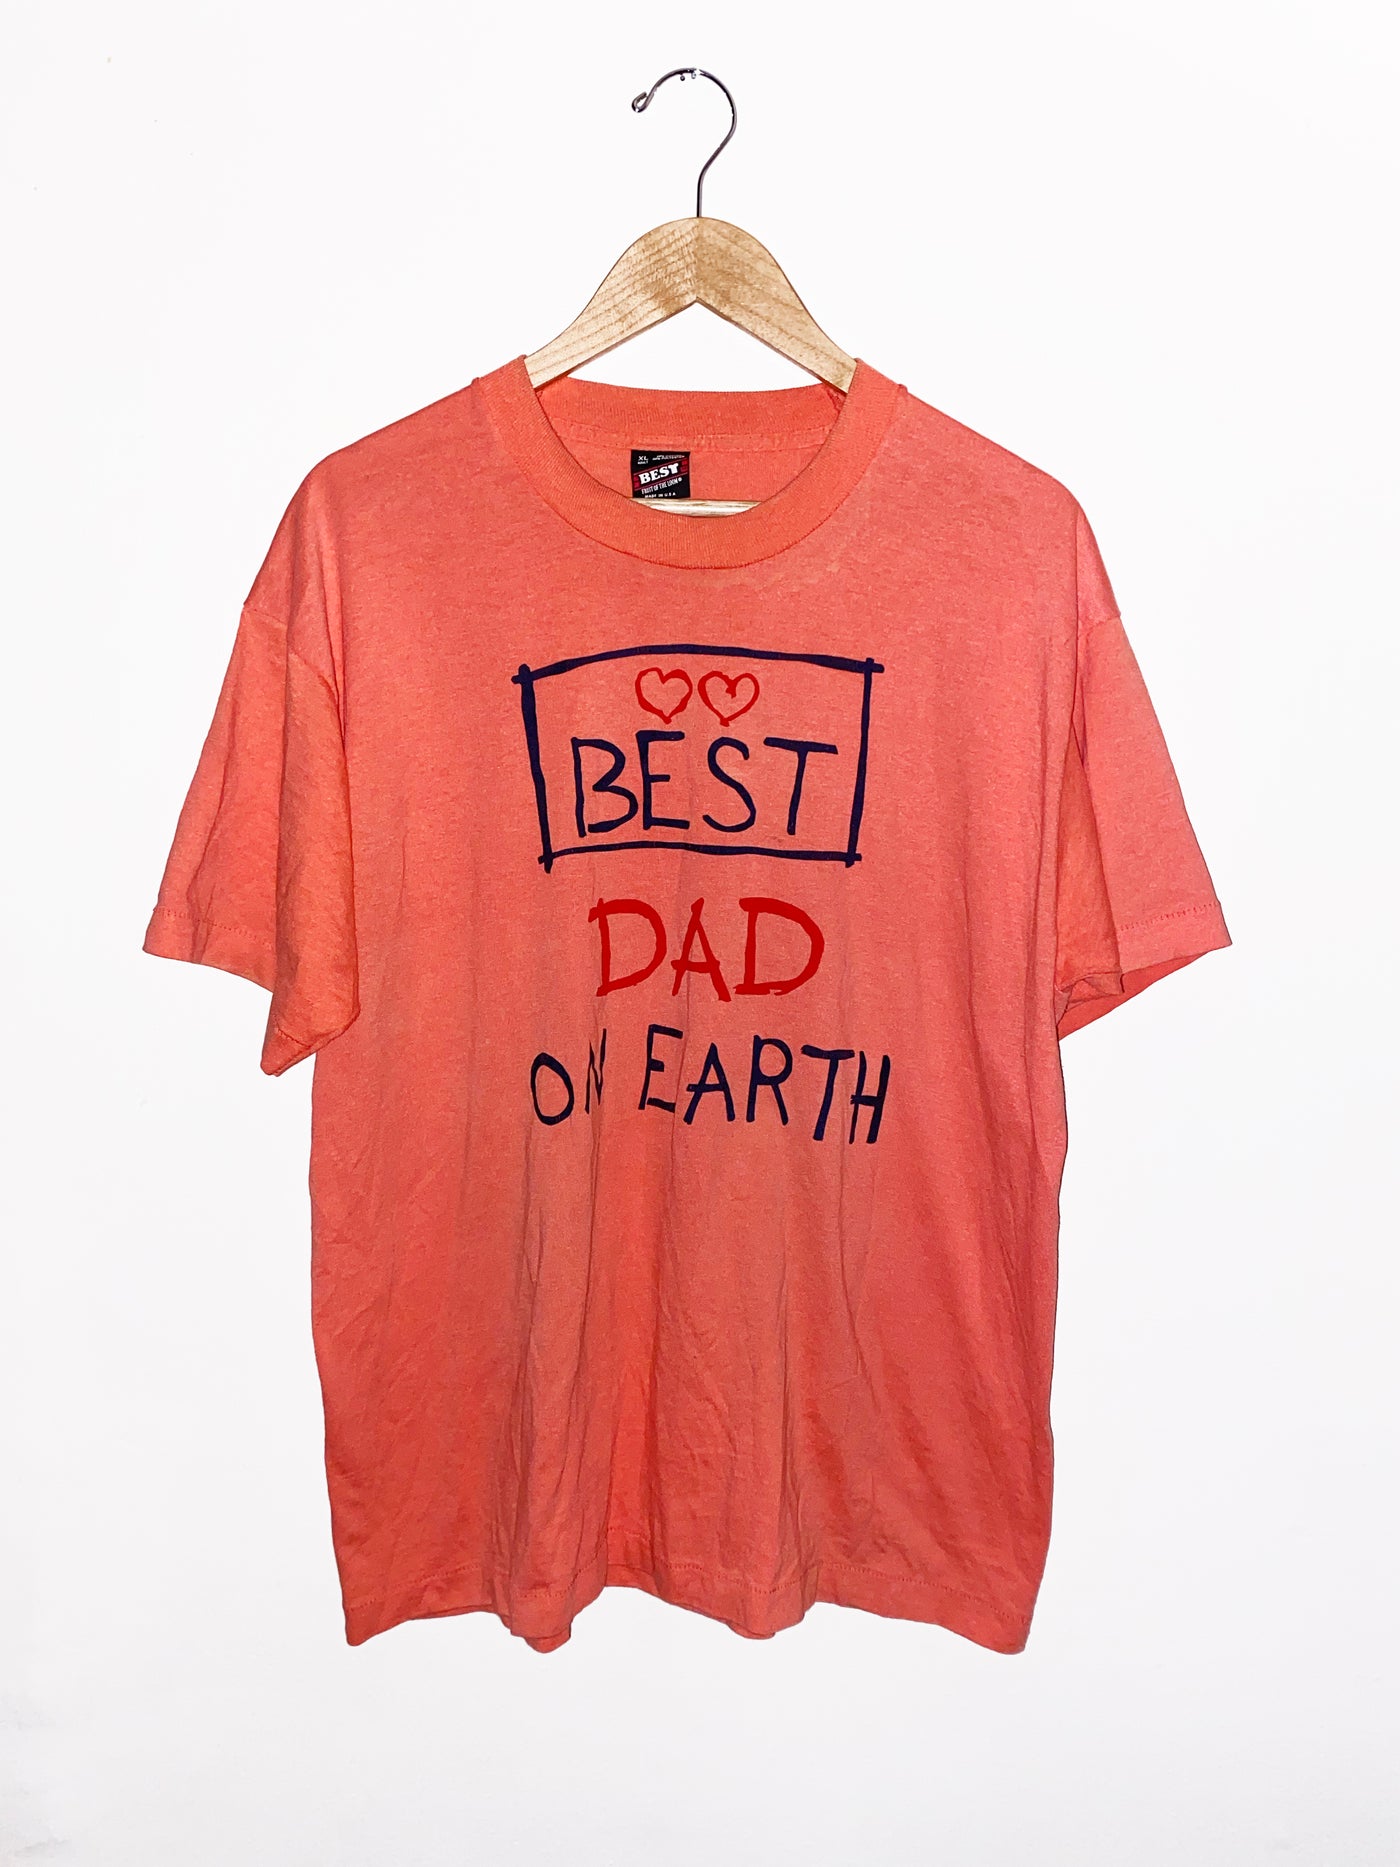 Vintage 80’s ‘Best Dad on Earth’ T-Shirt